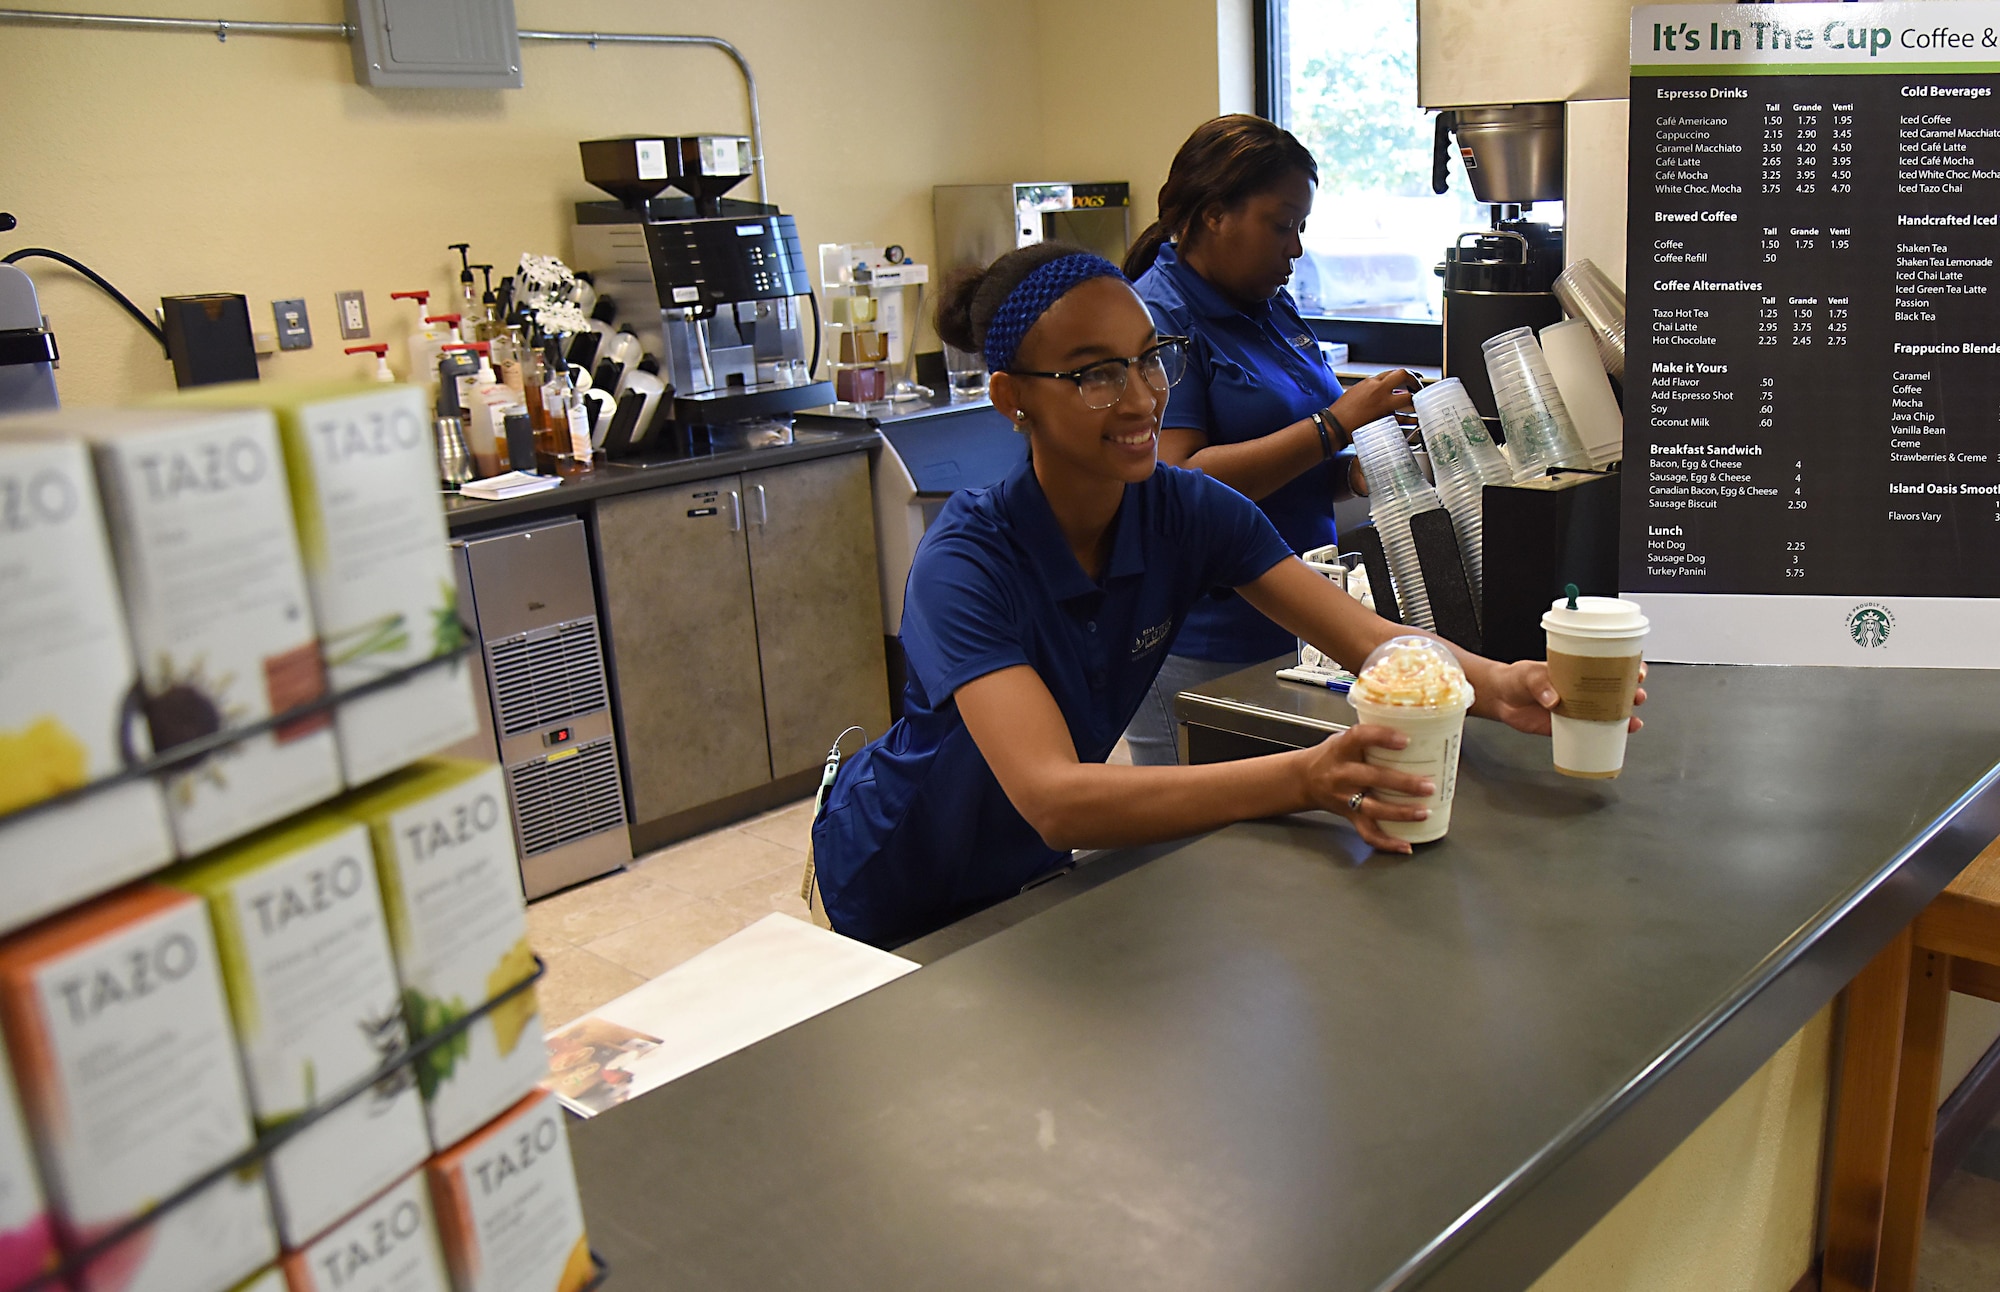 Quiana James and Teaunda Rodgers, 81st Force Support Squadron sales clerks, serve and prepare orders at “It Is In The Cup” in the Bay Breeze Event Center June 8, 2017, on Keesler Air Force Base, Miss. Keesler's new coffee & smoothie bar will have its grand opening on June 29 at the Bay Breeze Event Center. The facility proudly serves Starbucks coffee, Frappuccino’s, iced beverages and espresso as well as Island Oasis smoothies in a variety of flavors. A full menu of items can be found at keesler81fss.us. (U.S. Air Force photo by Kemberly Groue)